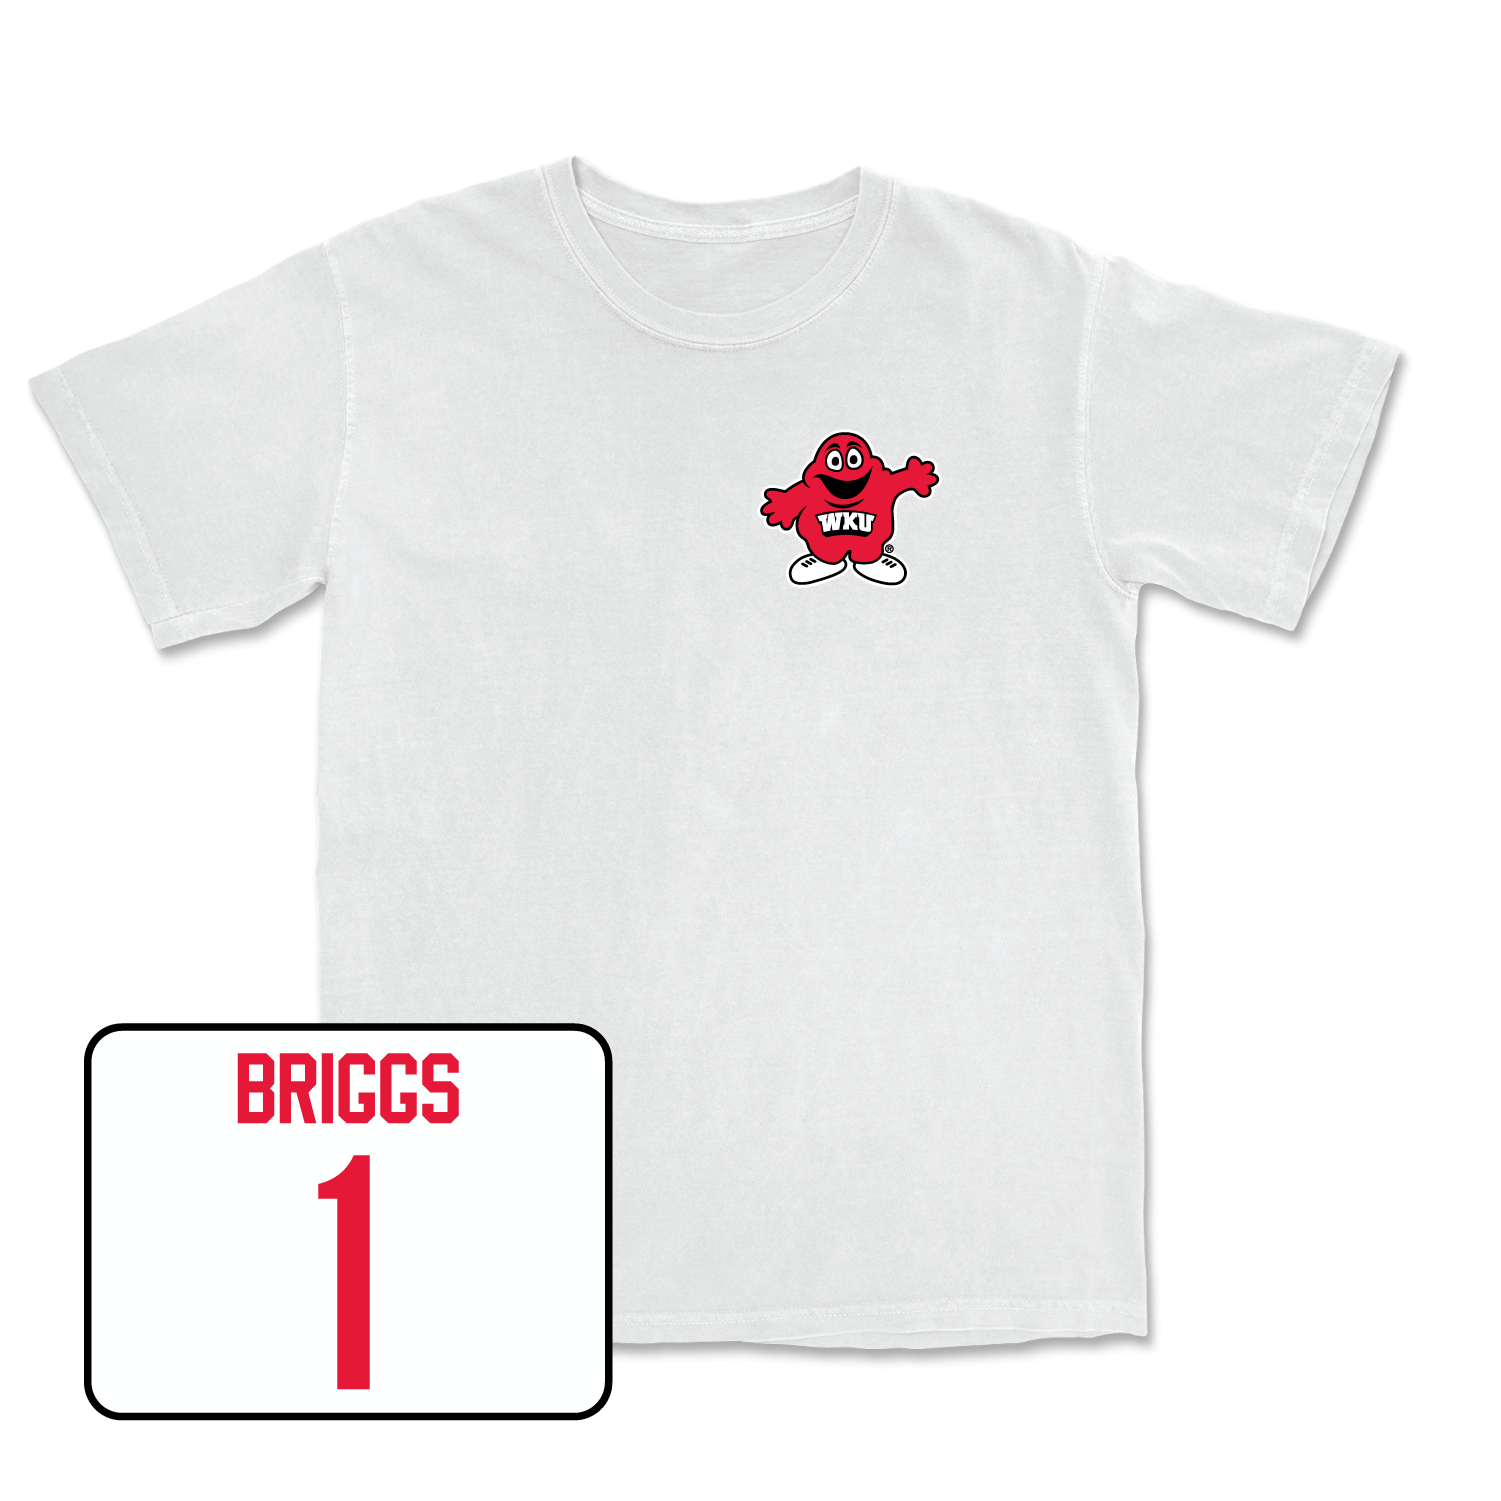 White Women's Volleyball Big Red Comfort Colors Tee 4X-Large / Paige Briggs | #1